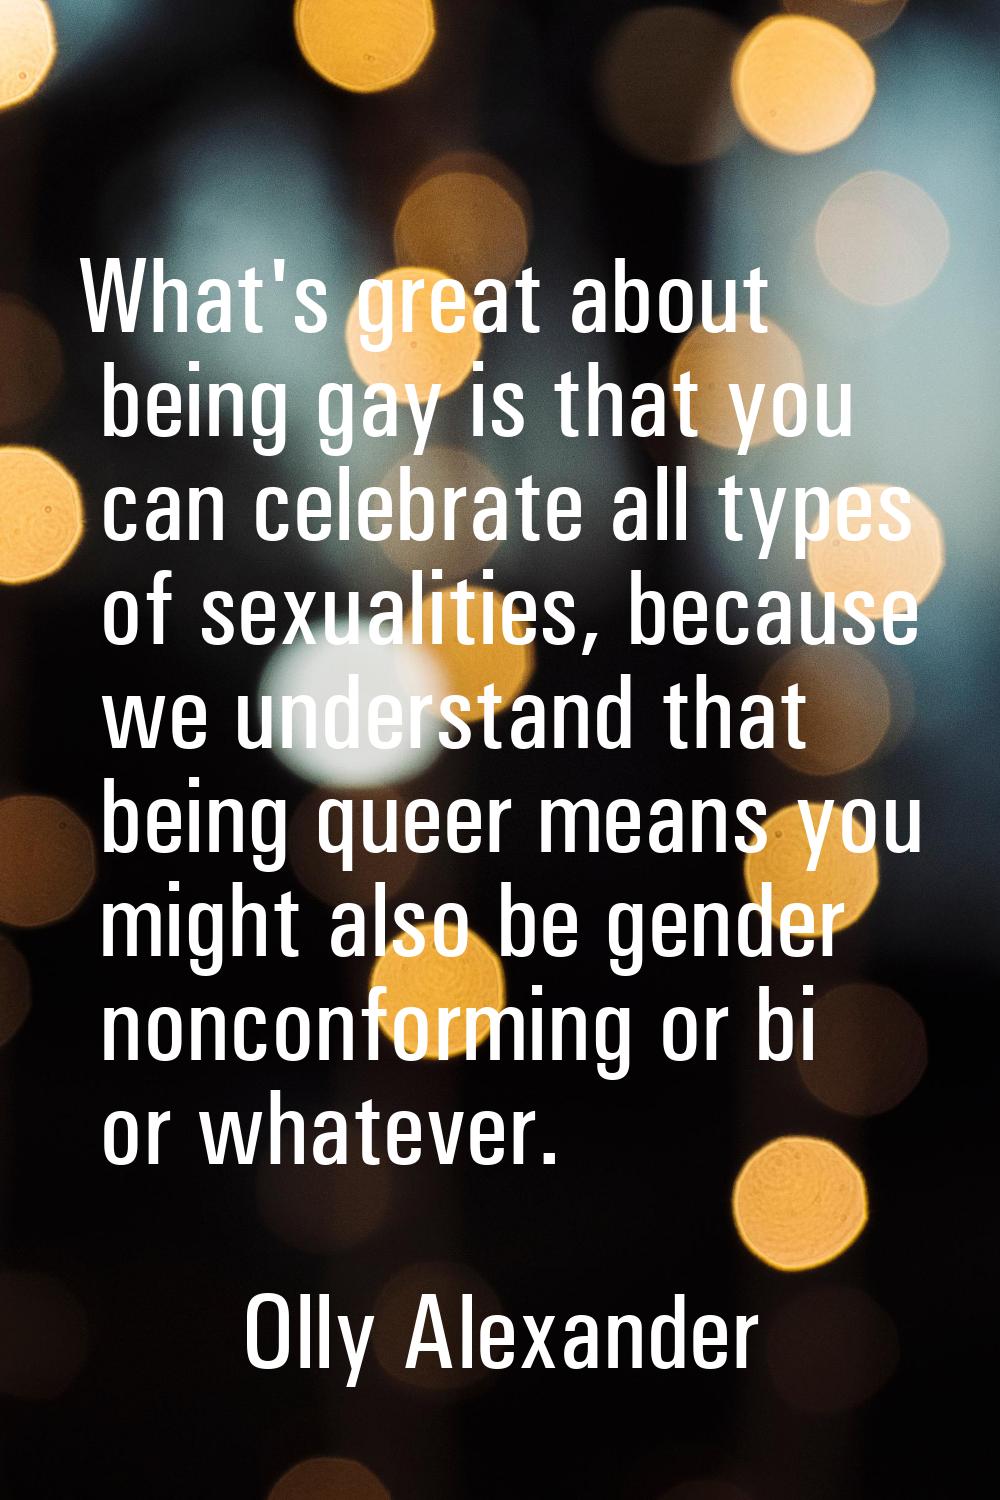 What's great about being gay is that you can celebrate all types of sexualities, because we underst